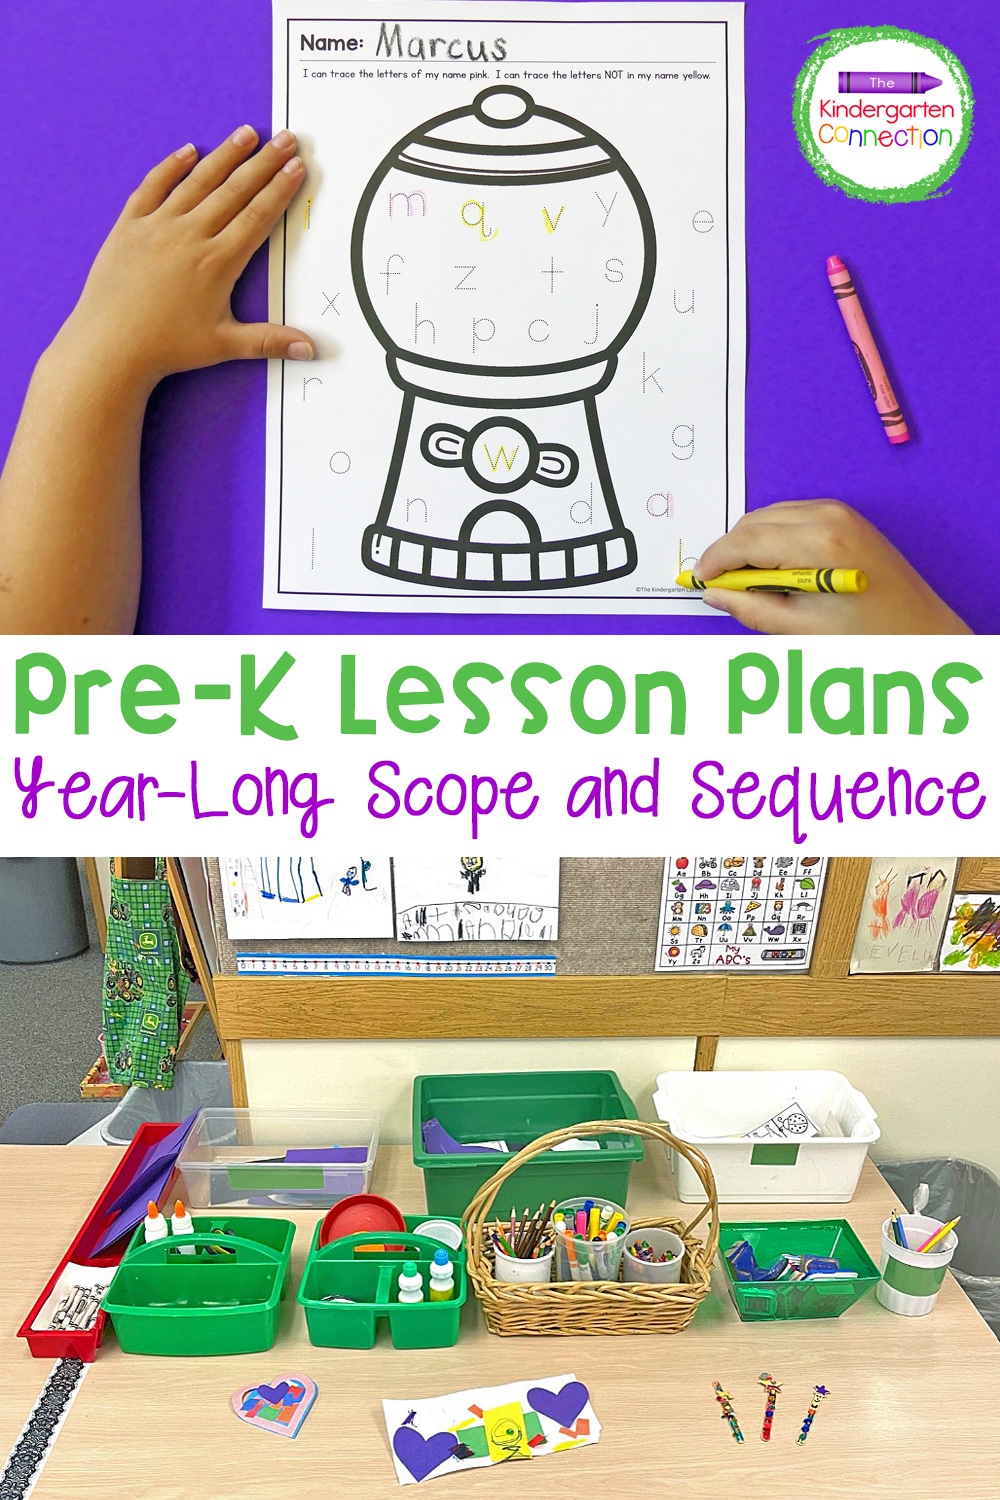 This Scope and Sequence is designed for Pre-K and is full of easy-prep lesson plans!